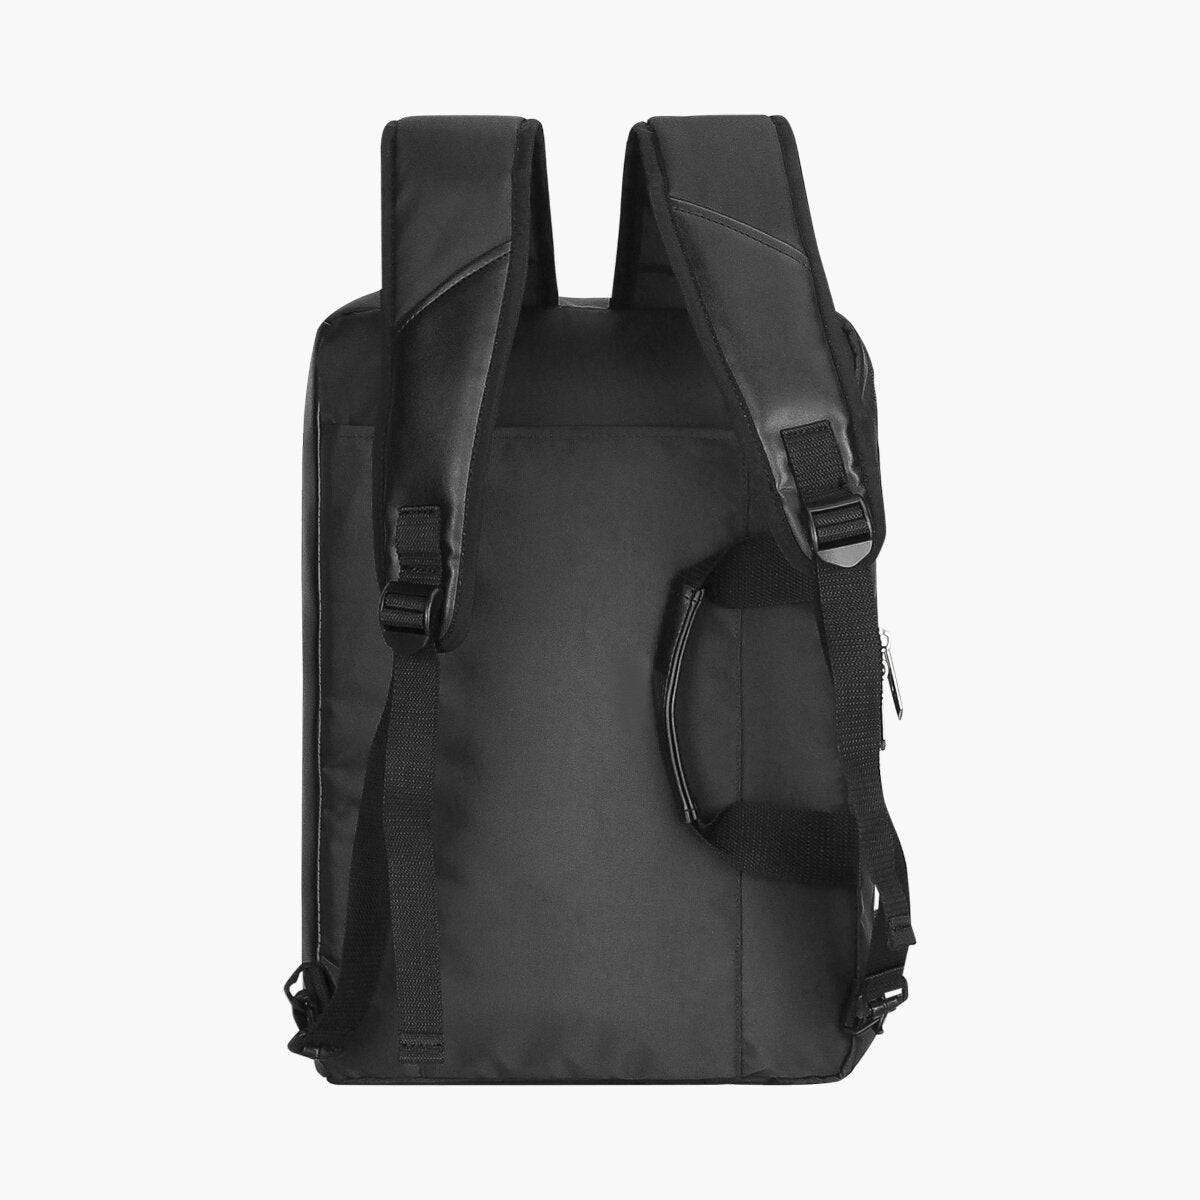 Black | Protecta The Underdog Convertible Briefcase Backpack - 7